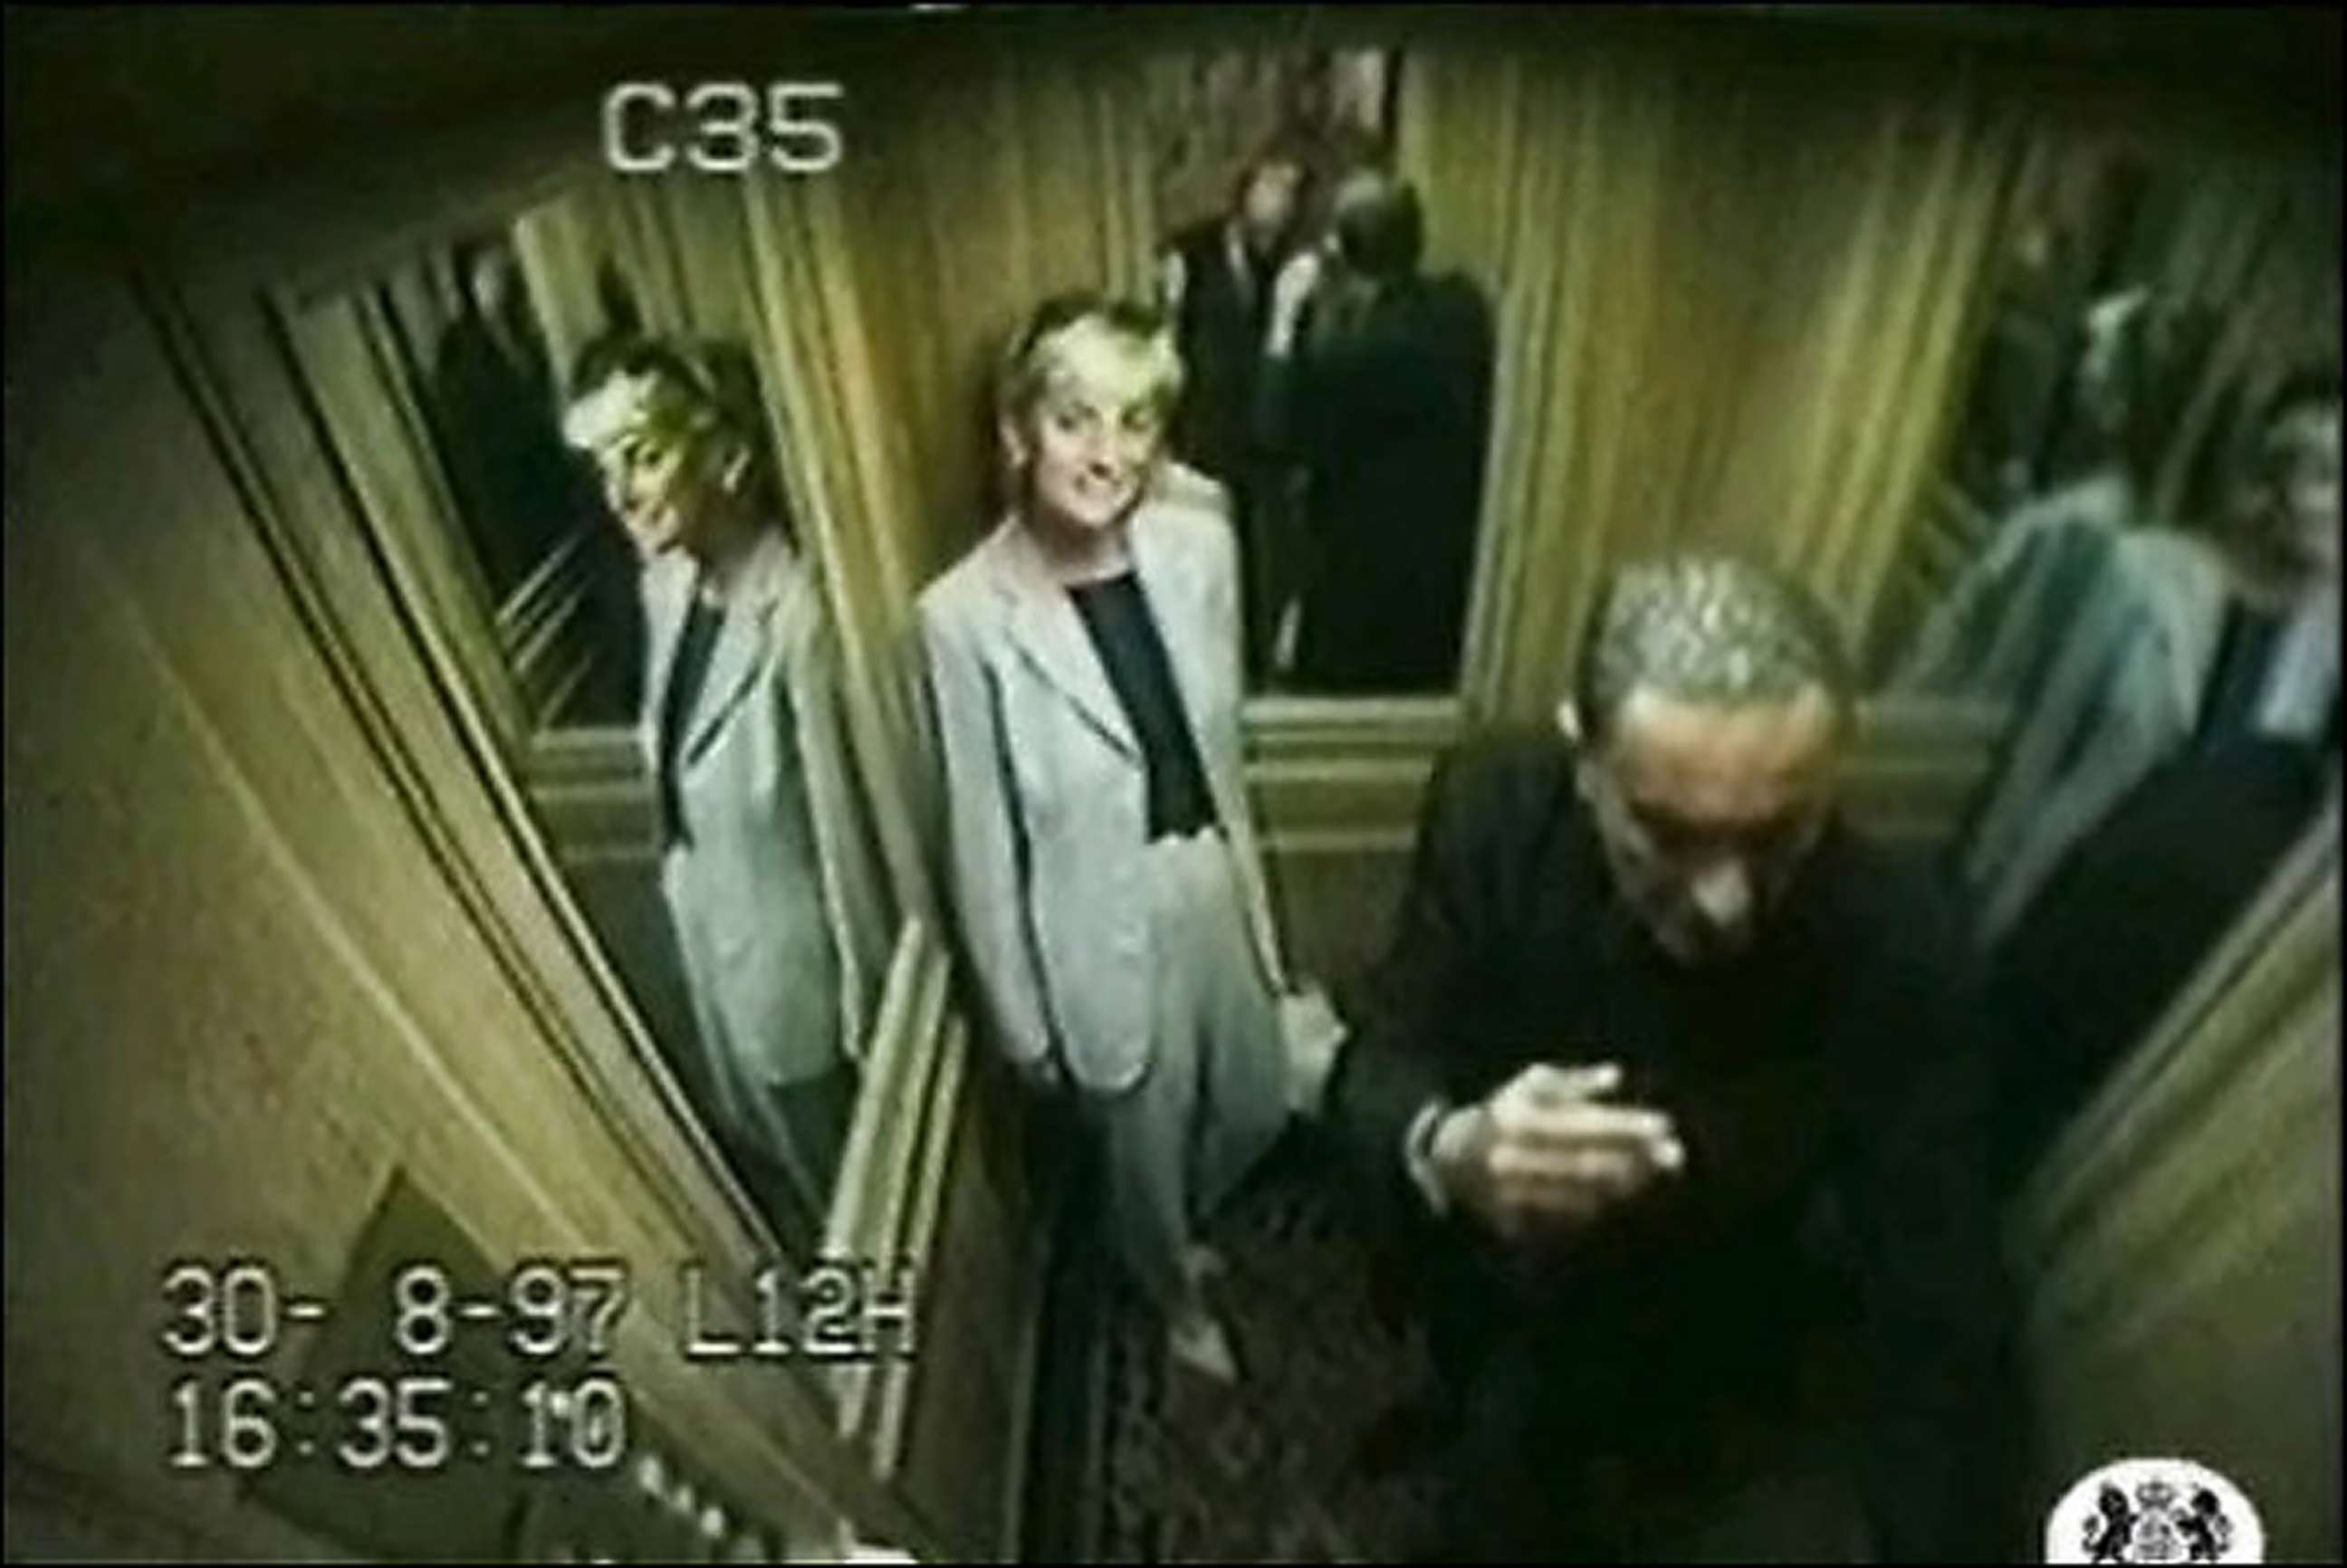 PHOTO: Princess Diana with Dodi Fayed in an elevator at the Ritz hotel in Paris on Aug. 30, 1997, shortly before they died in a car crash.
